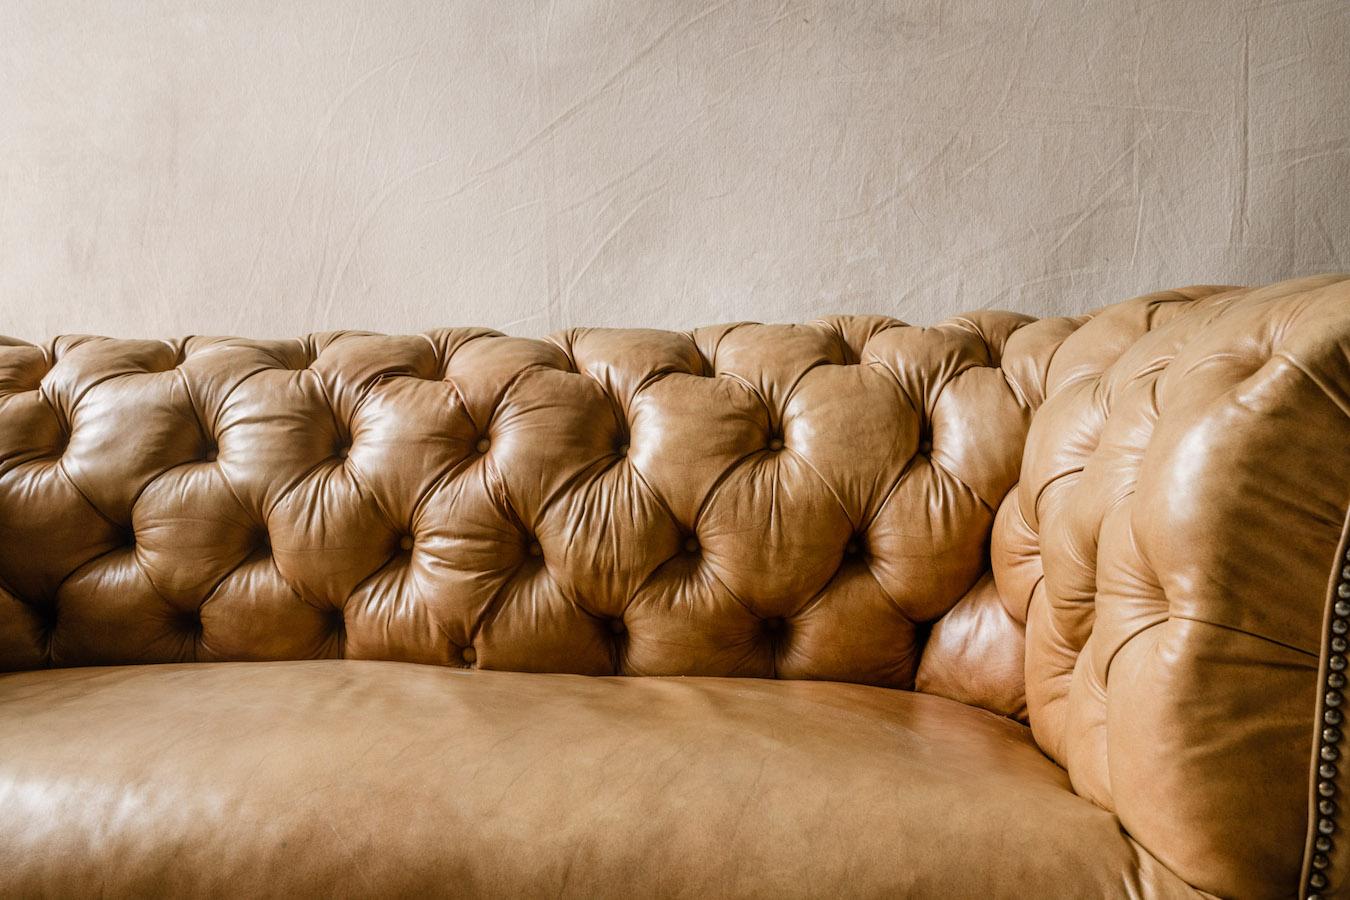 Mid-20th Century Vintage Leather Chesterfield Sofa from Denmark, Circa 1950